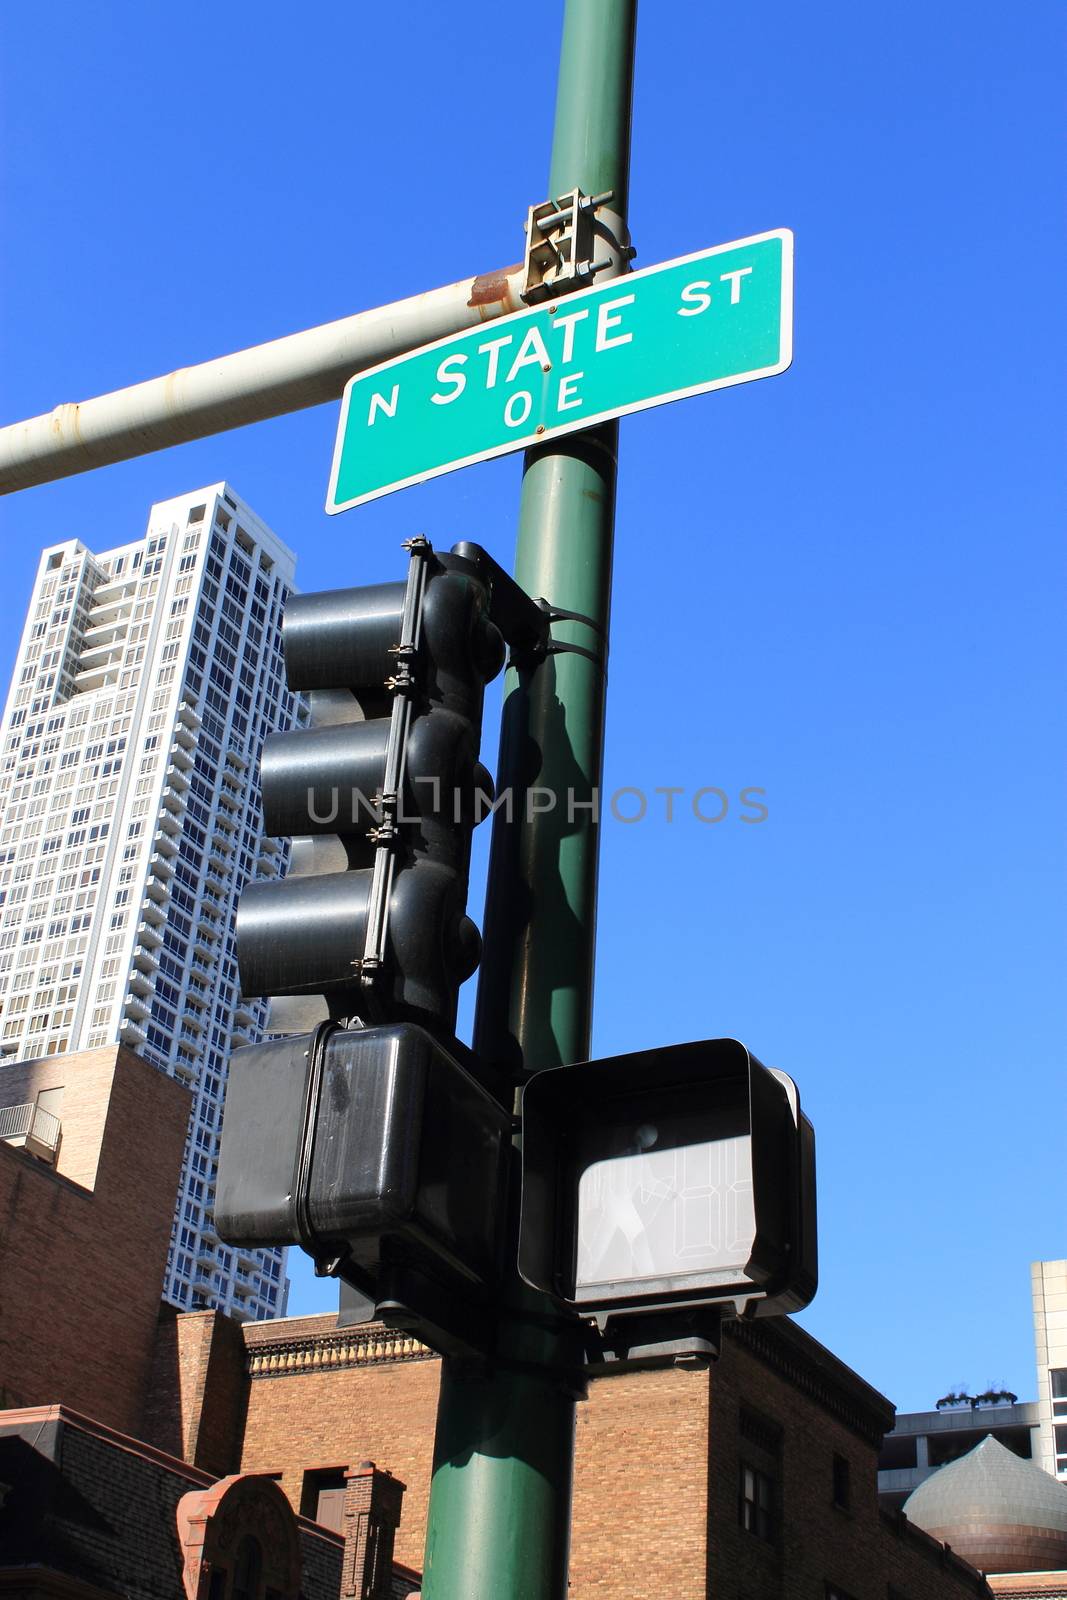 Chicago State Street sign and traffic light.